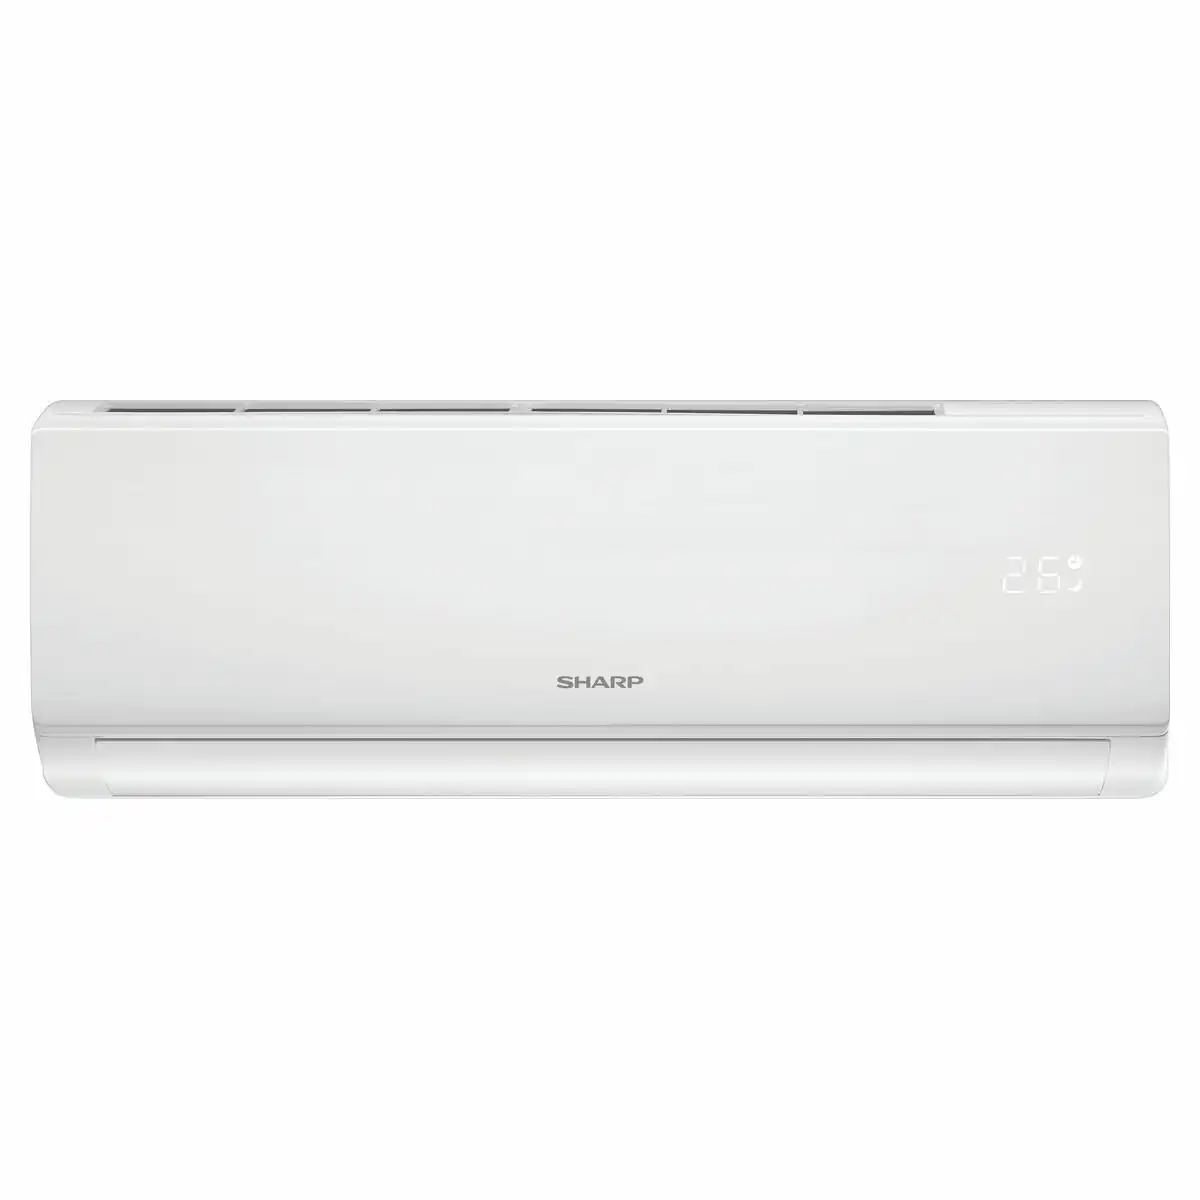 Sharp 2.5kW Reverse Cycle Inverter Split System Air Conditioner